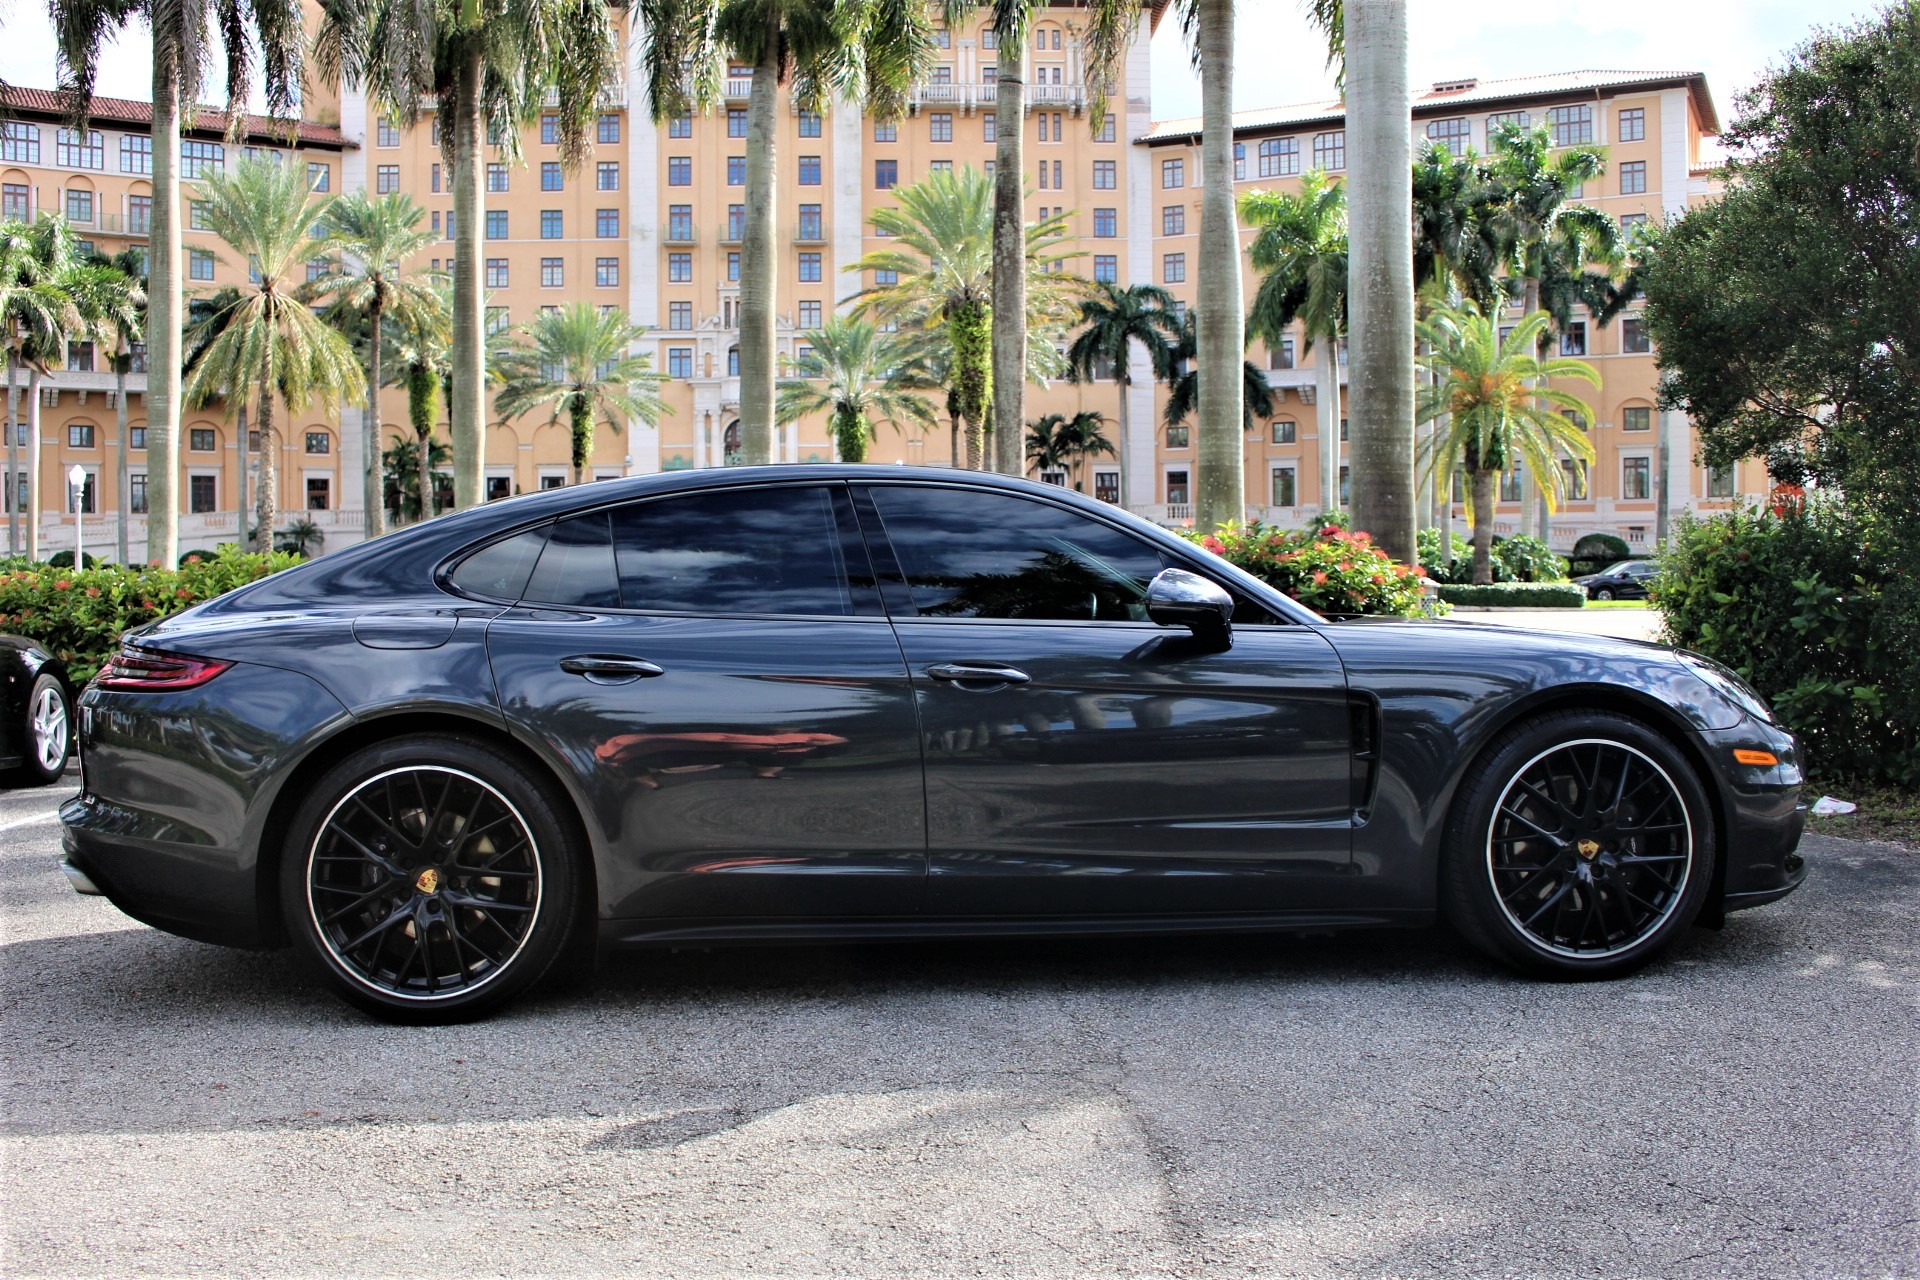 Used 2019 Porsche Panamera for sale Sold at The Gables Sports Cars in Miami FL 33146 3